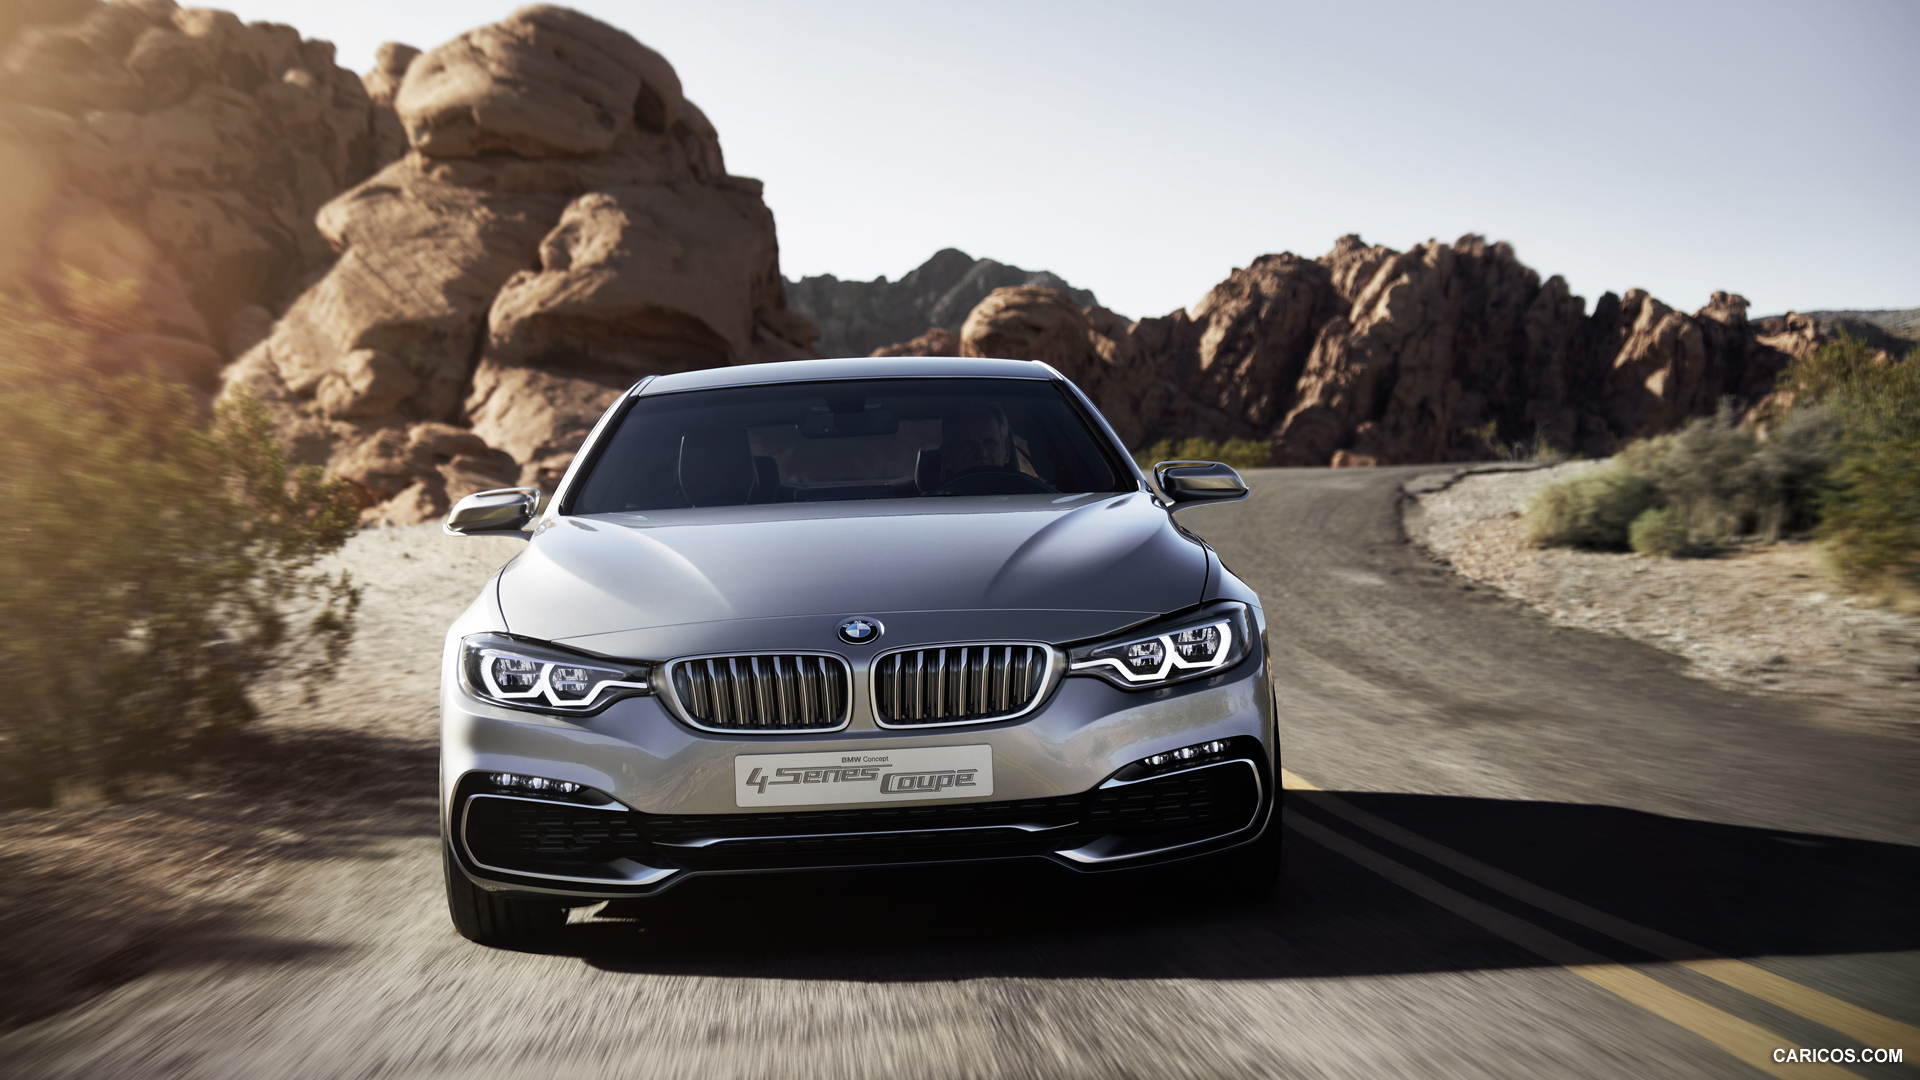 2013_bmw_4-series_coupe_concept_1_1920x1080.jpg